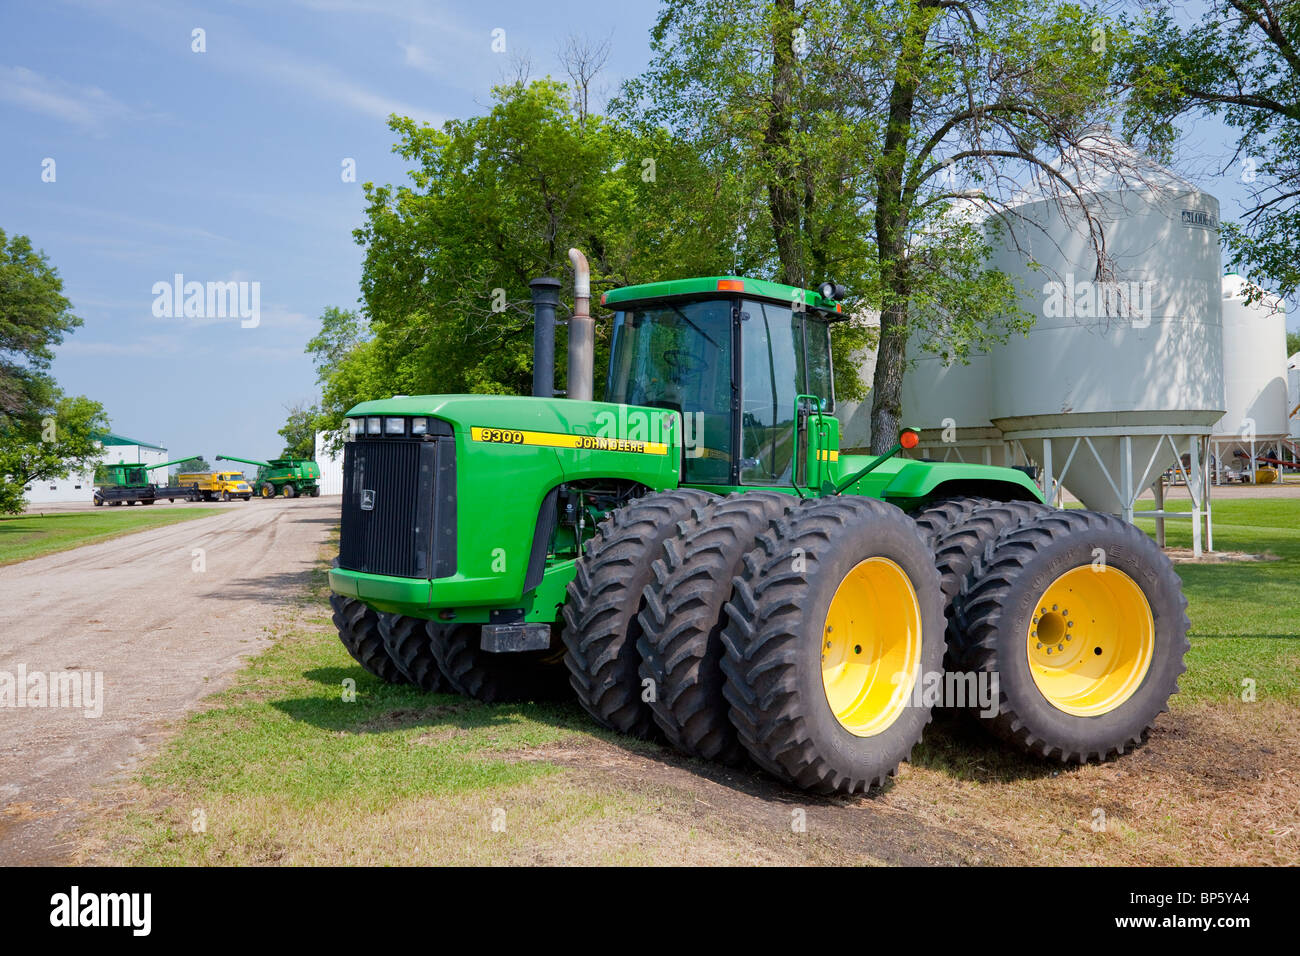 John Deere tractor at the driveway entrance to the Froese farm at Reinfeld, near Winkler, Manitoba, Canada. Stock Photo